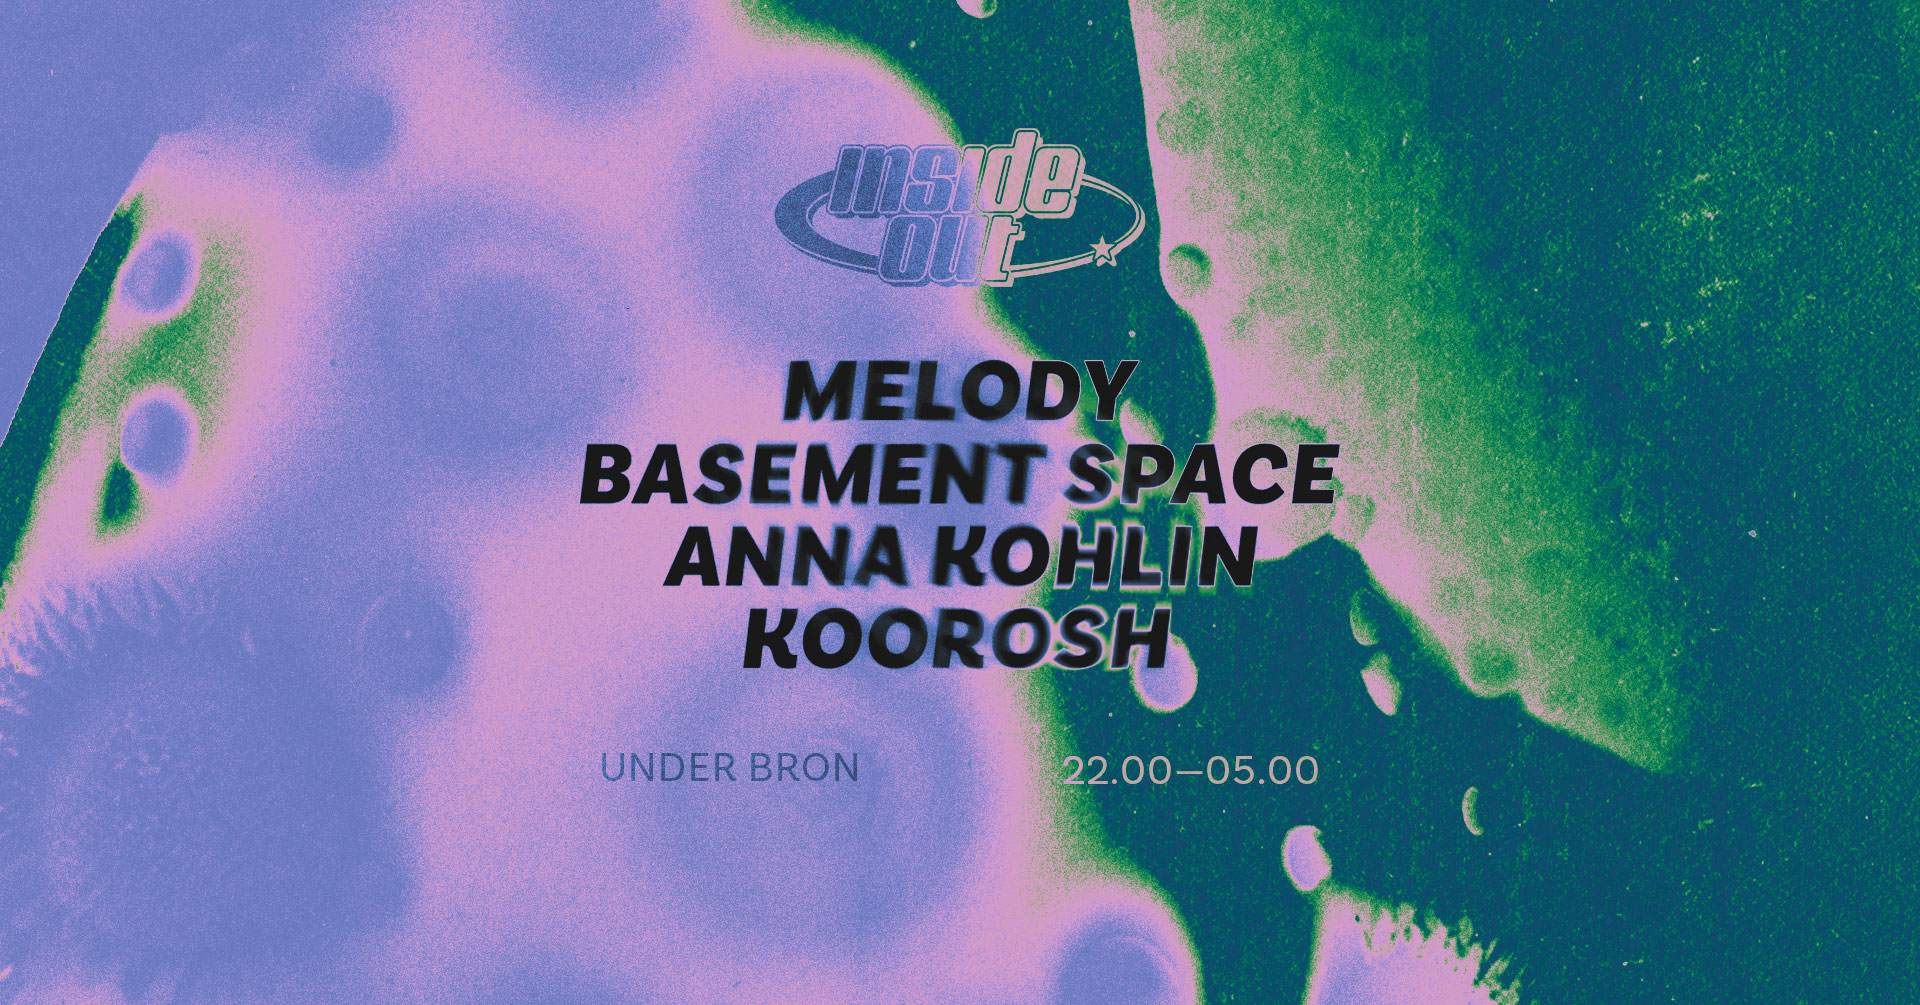 Inside Out Release Party - Melody, Basement Space, Anna Kohlin & Koorosh - フライヤー表